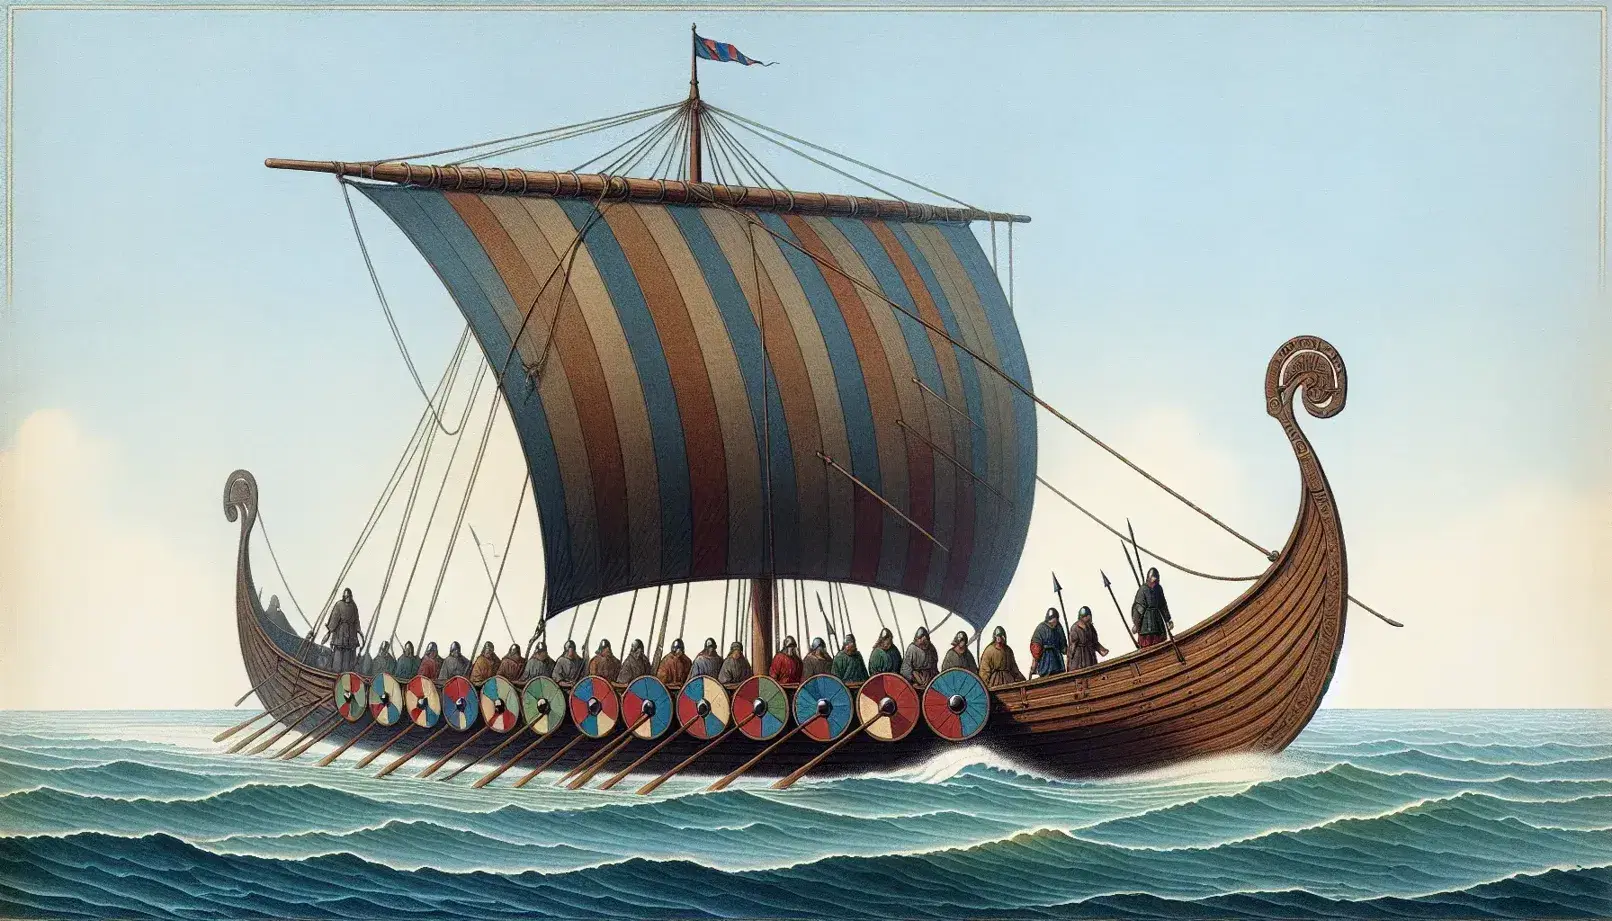 Viking longship at sea with a billowing sail, shields lining the hull, and crew in tunics, under a soft blue sky on glistening waters.